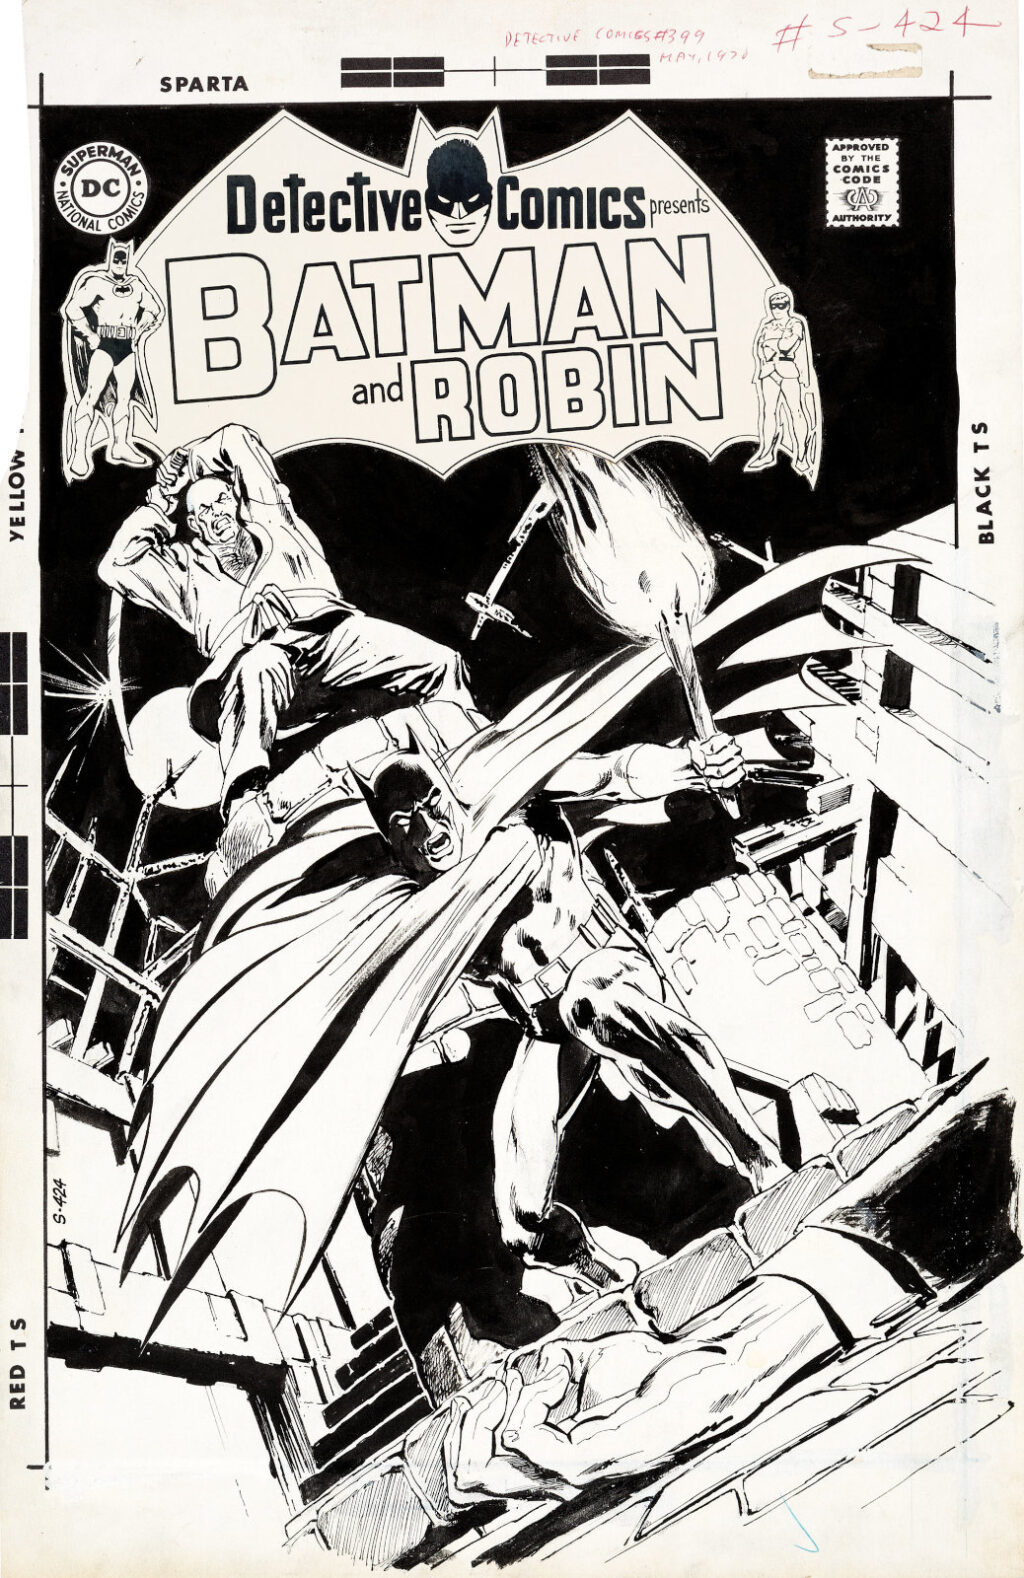 Detective Comics issue 399 cover by Neal Adams